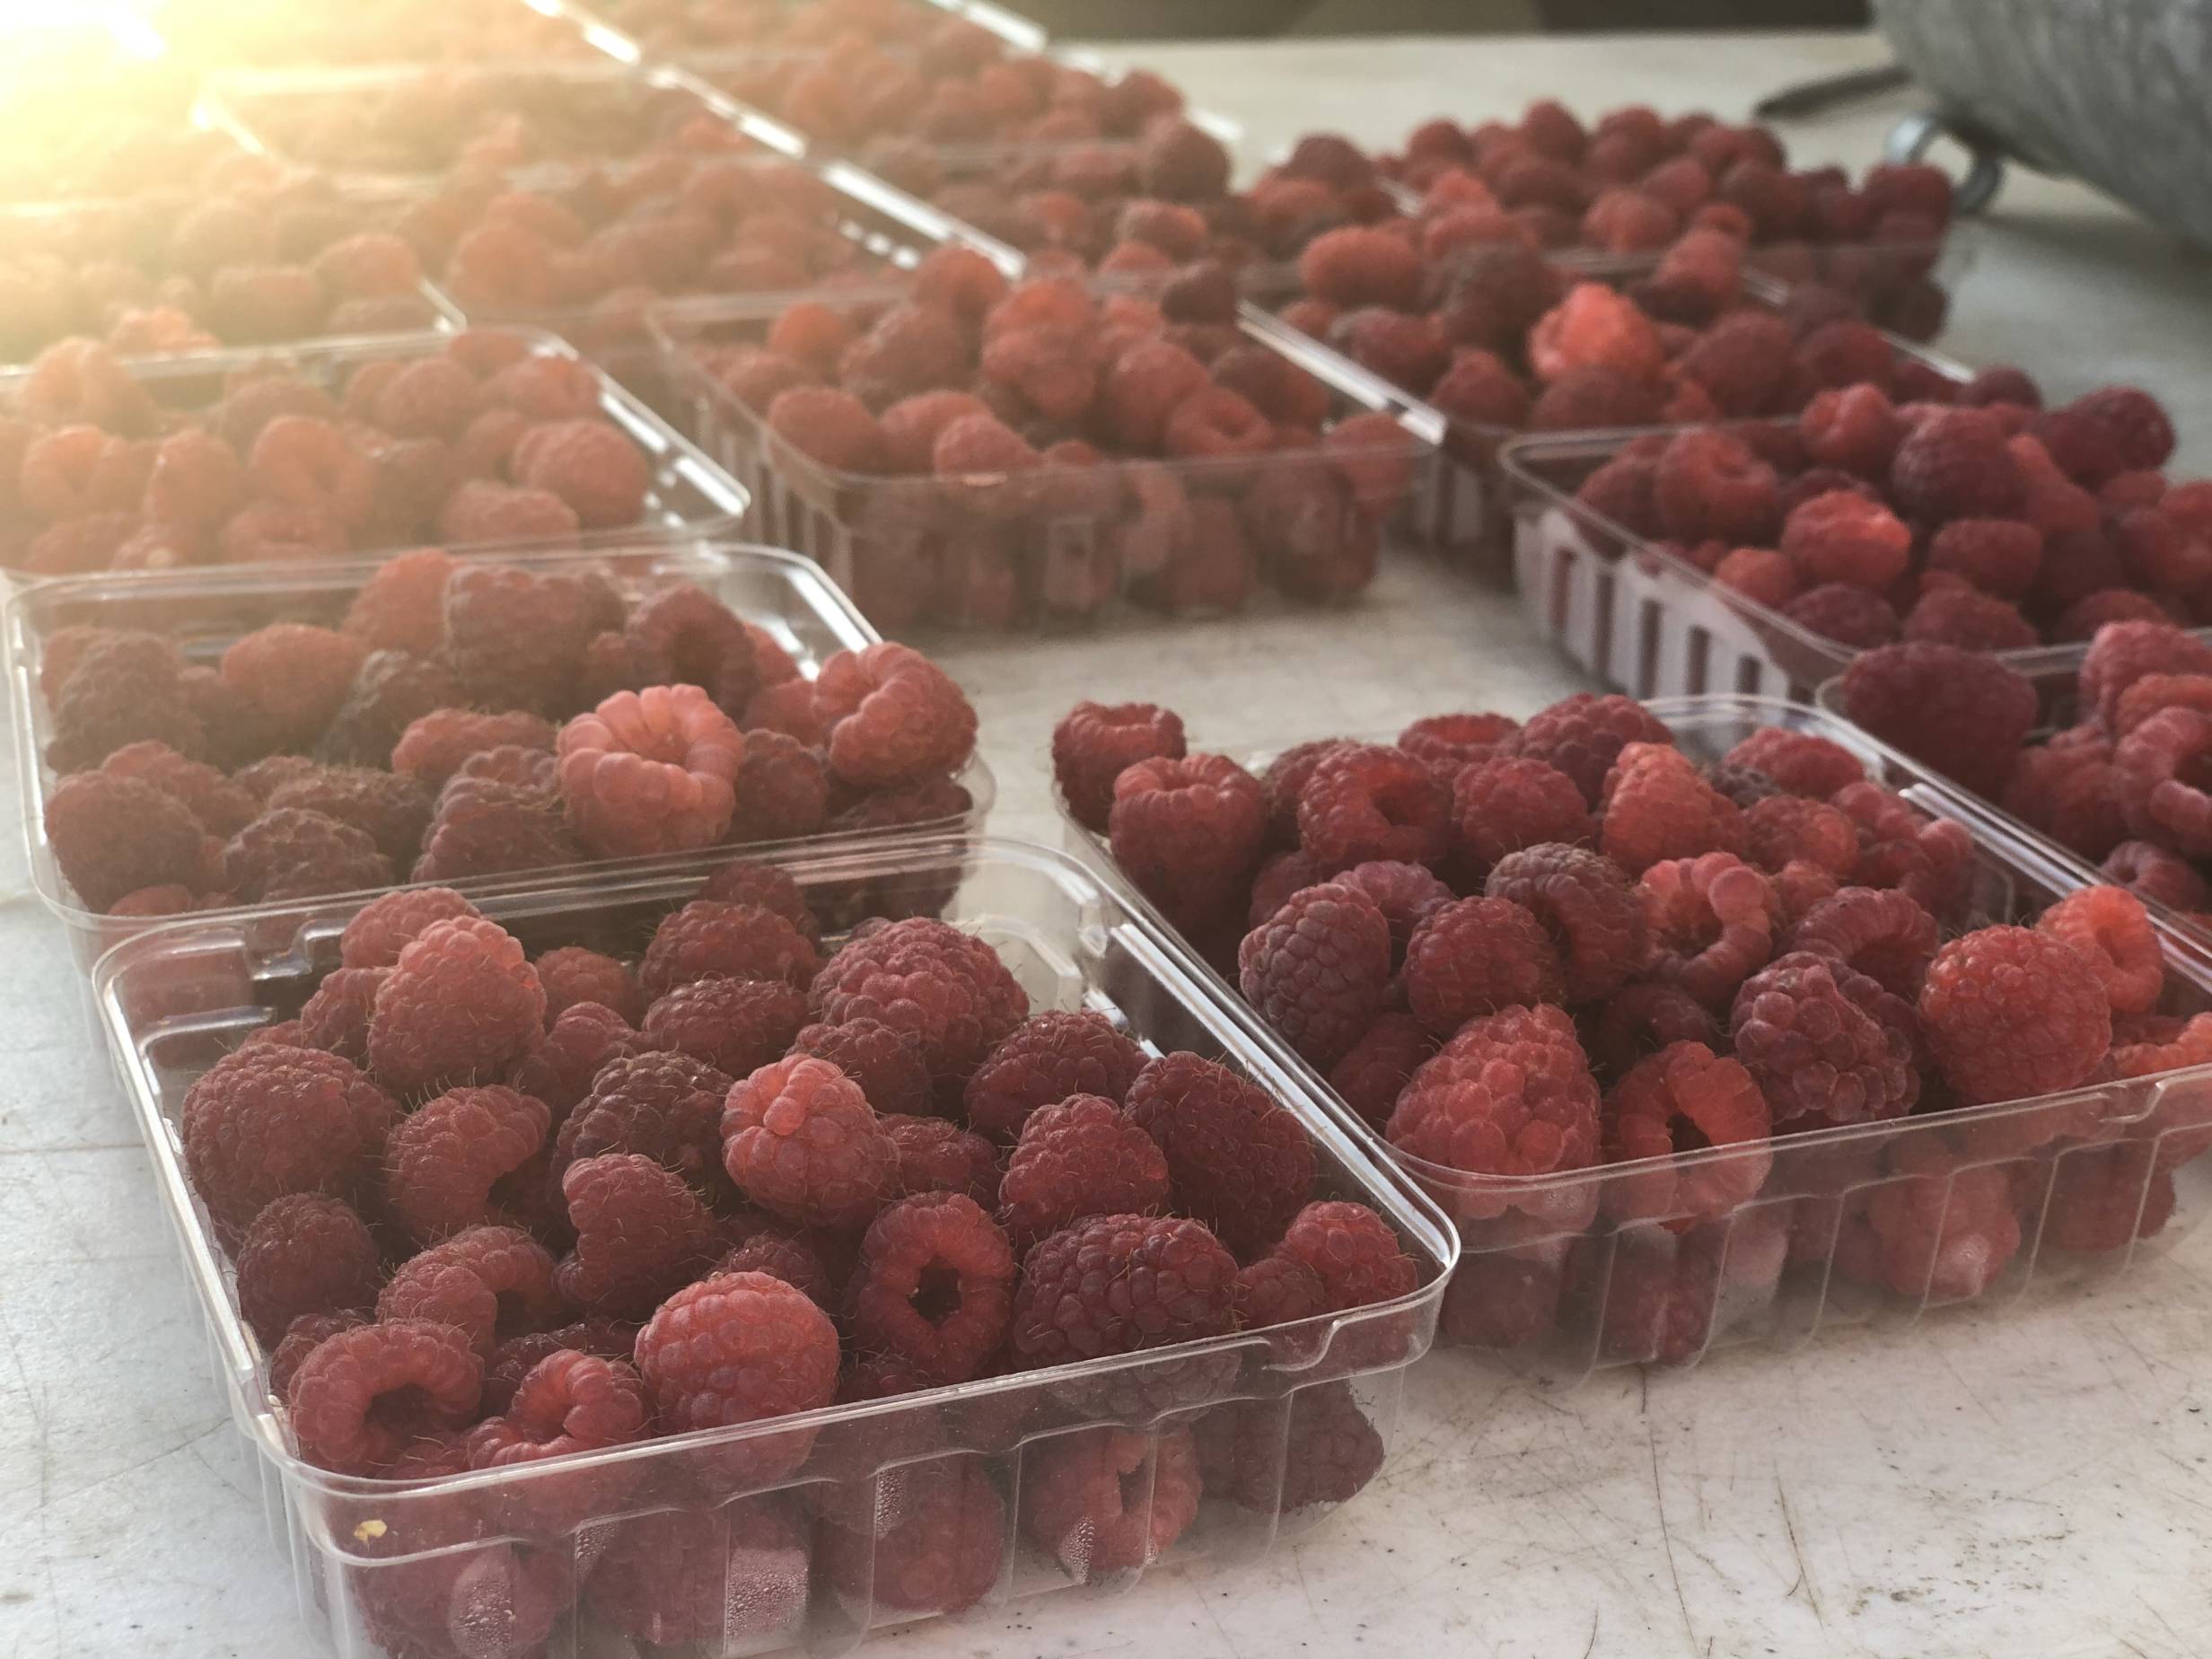 Many small, plastic clear containers contain freshly picked raspberries. Photo by Alyssa Buckley.